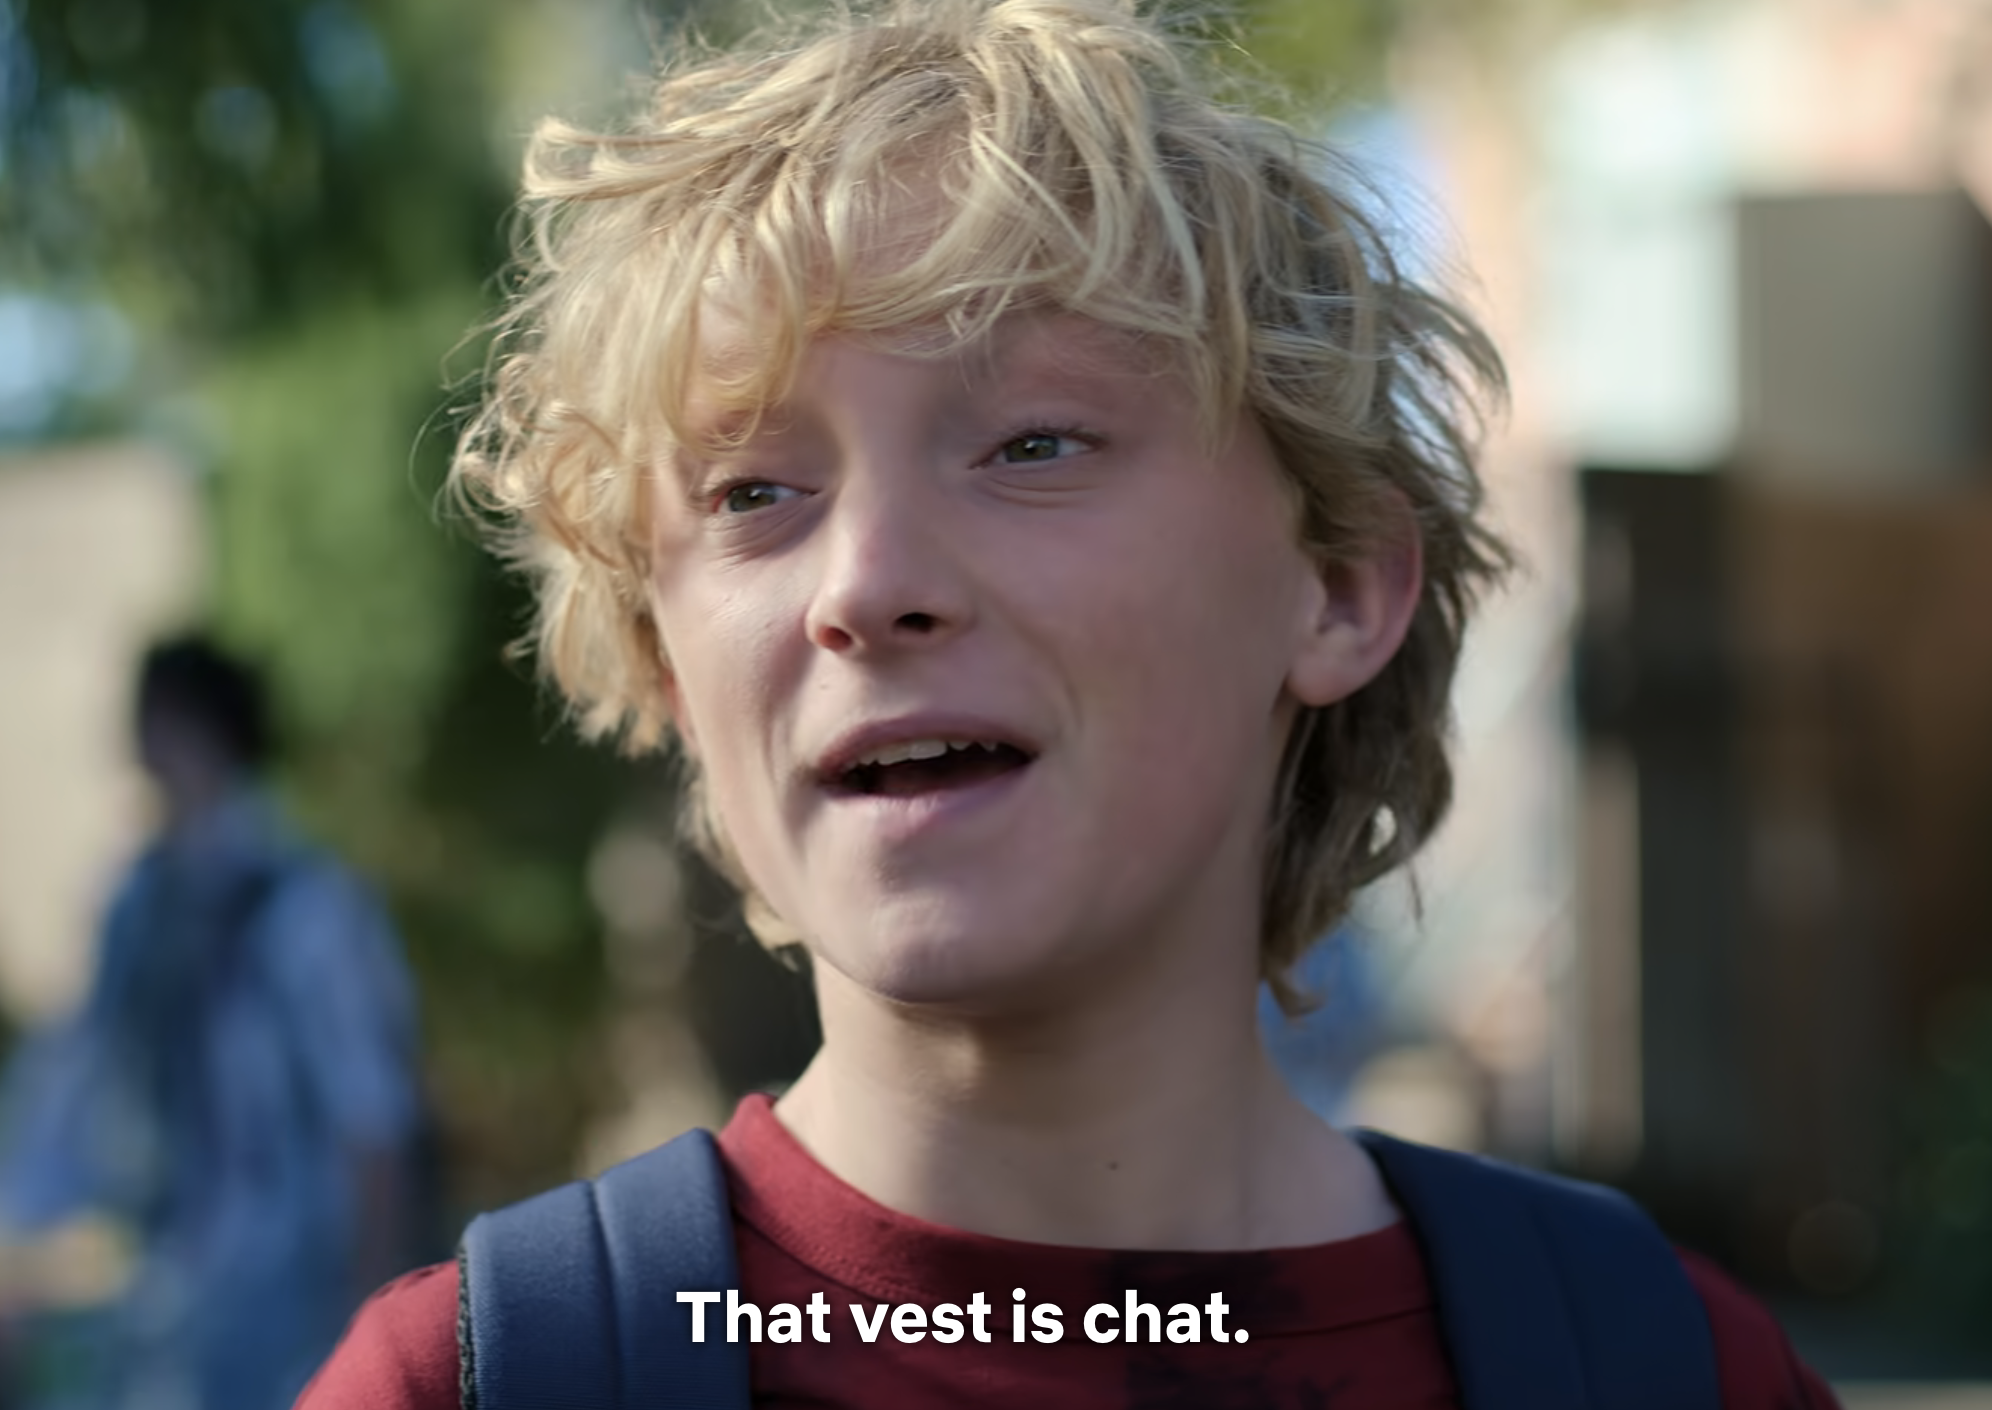 Boy with blond hair and a red backpack; subtitle reads &quot;That vest is chat.&quot;